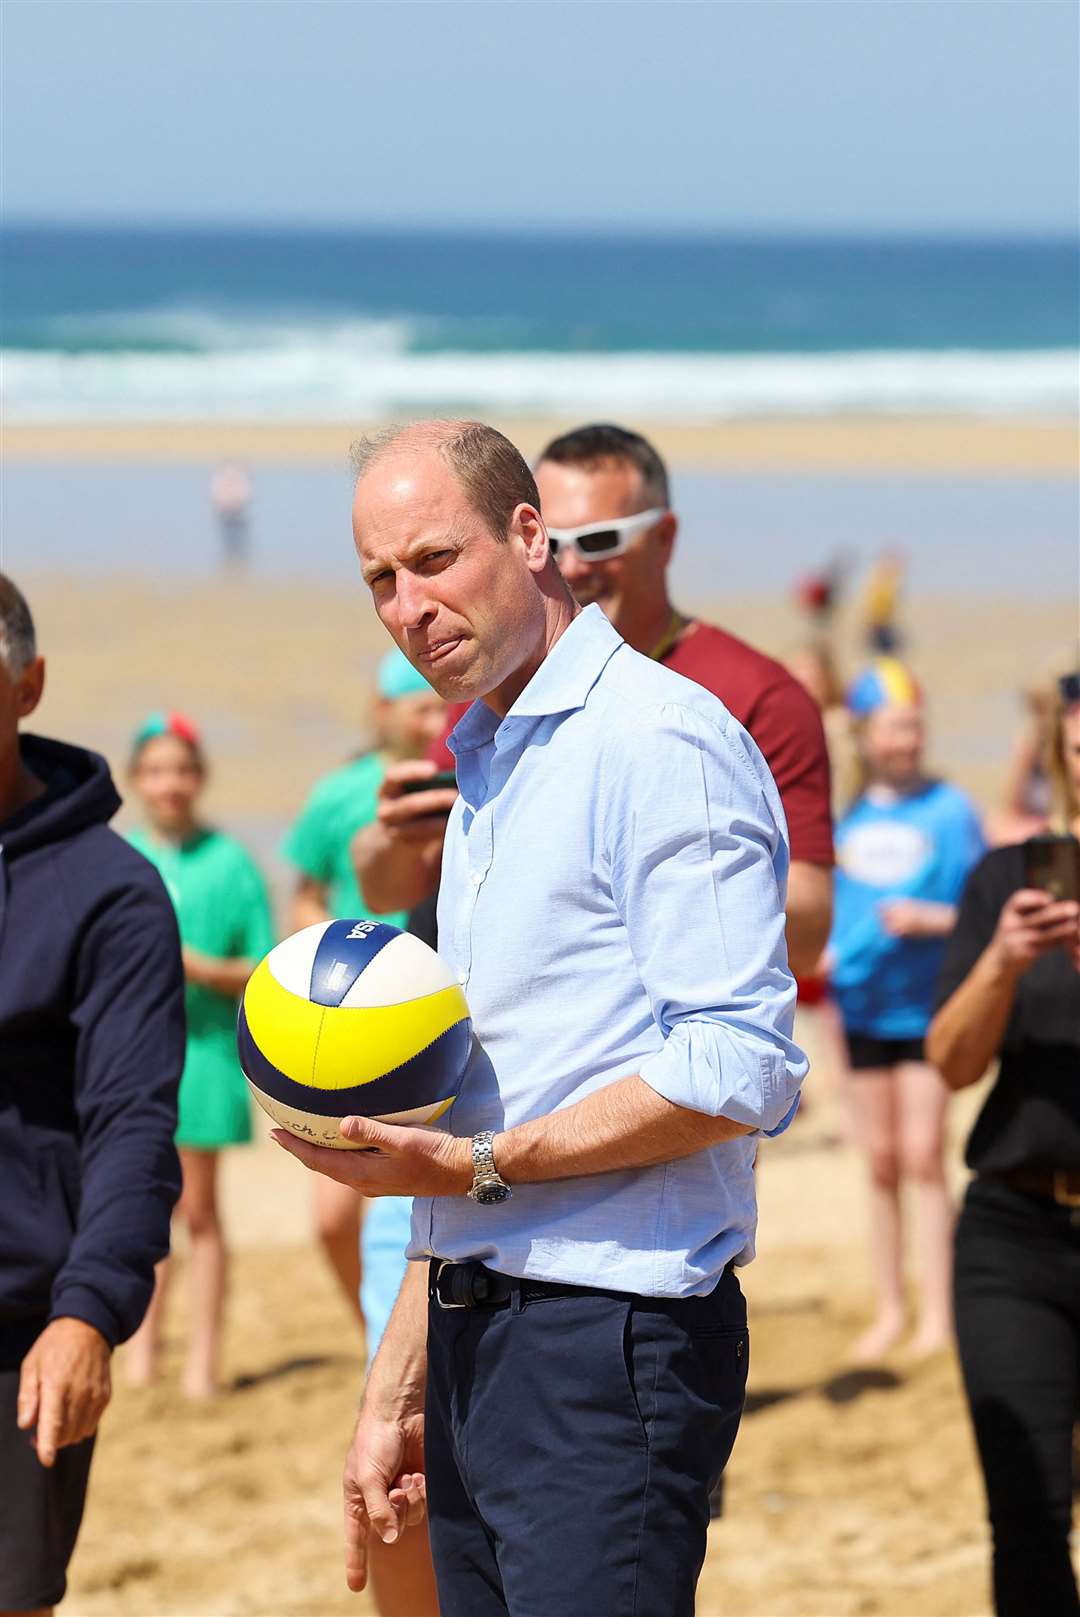 William takes part in a game of volleyball during a visit to Fistral beach in Newquay (Toby Melville/PA)